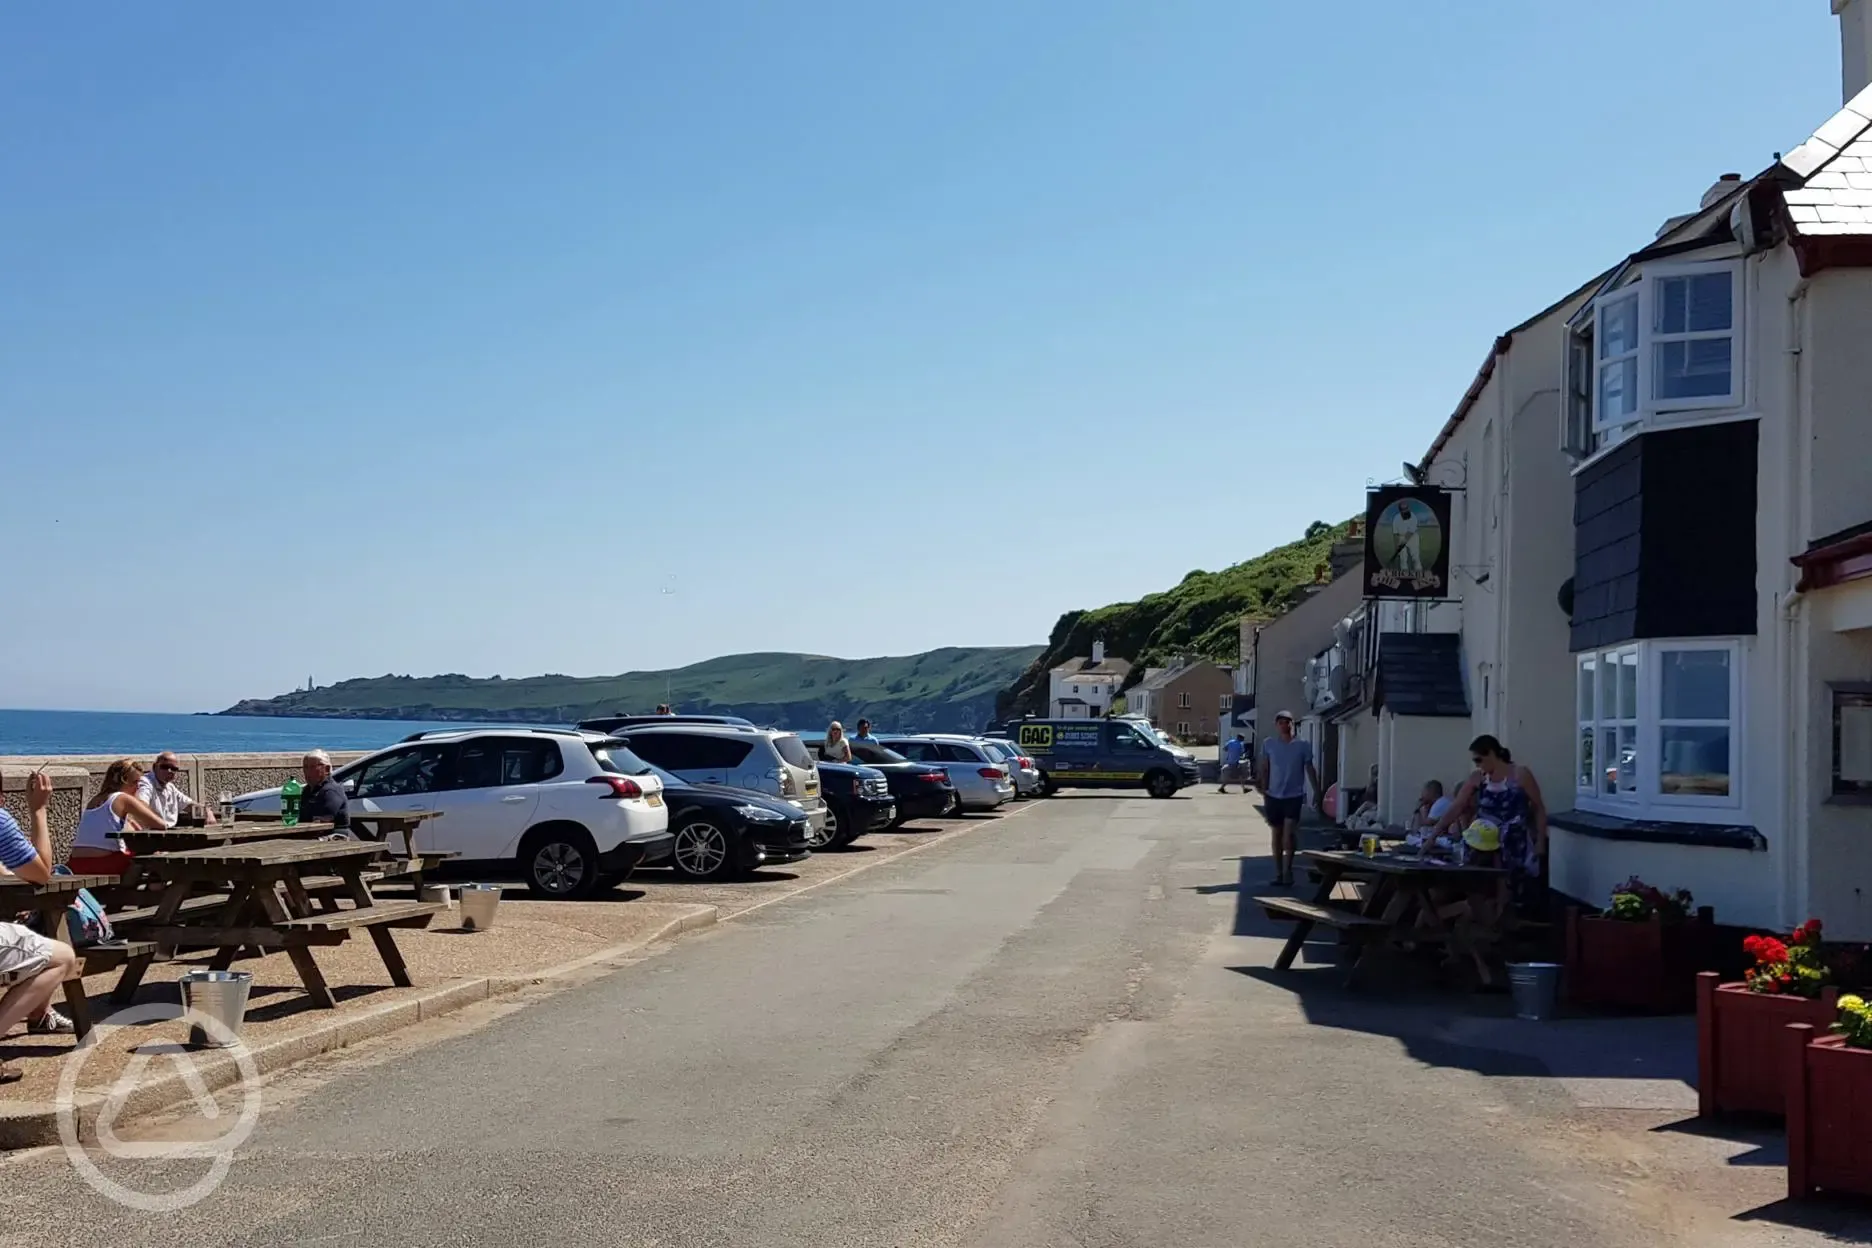 Beesands village - a great pub and two great restaurants!